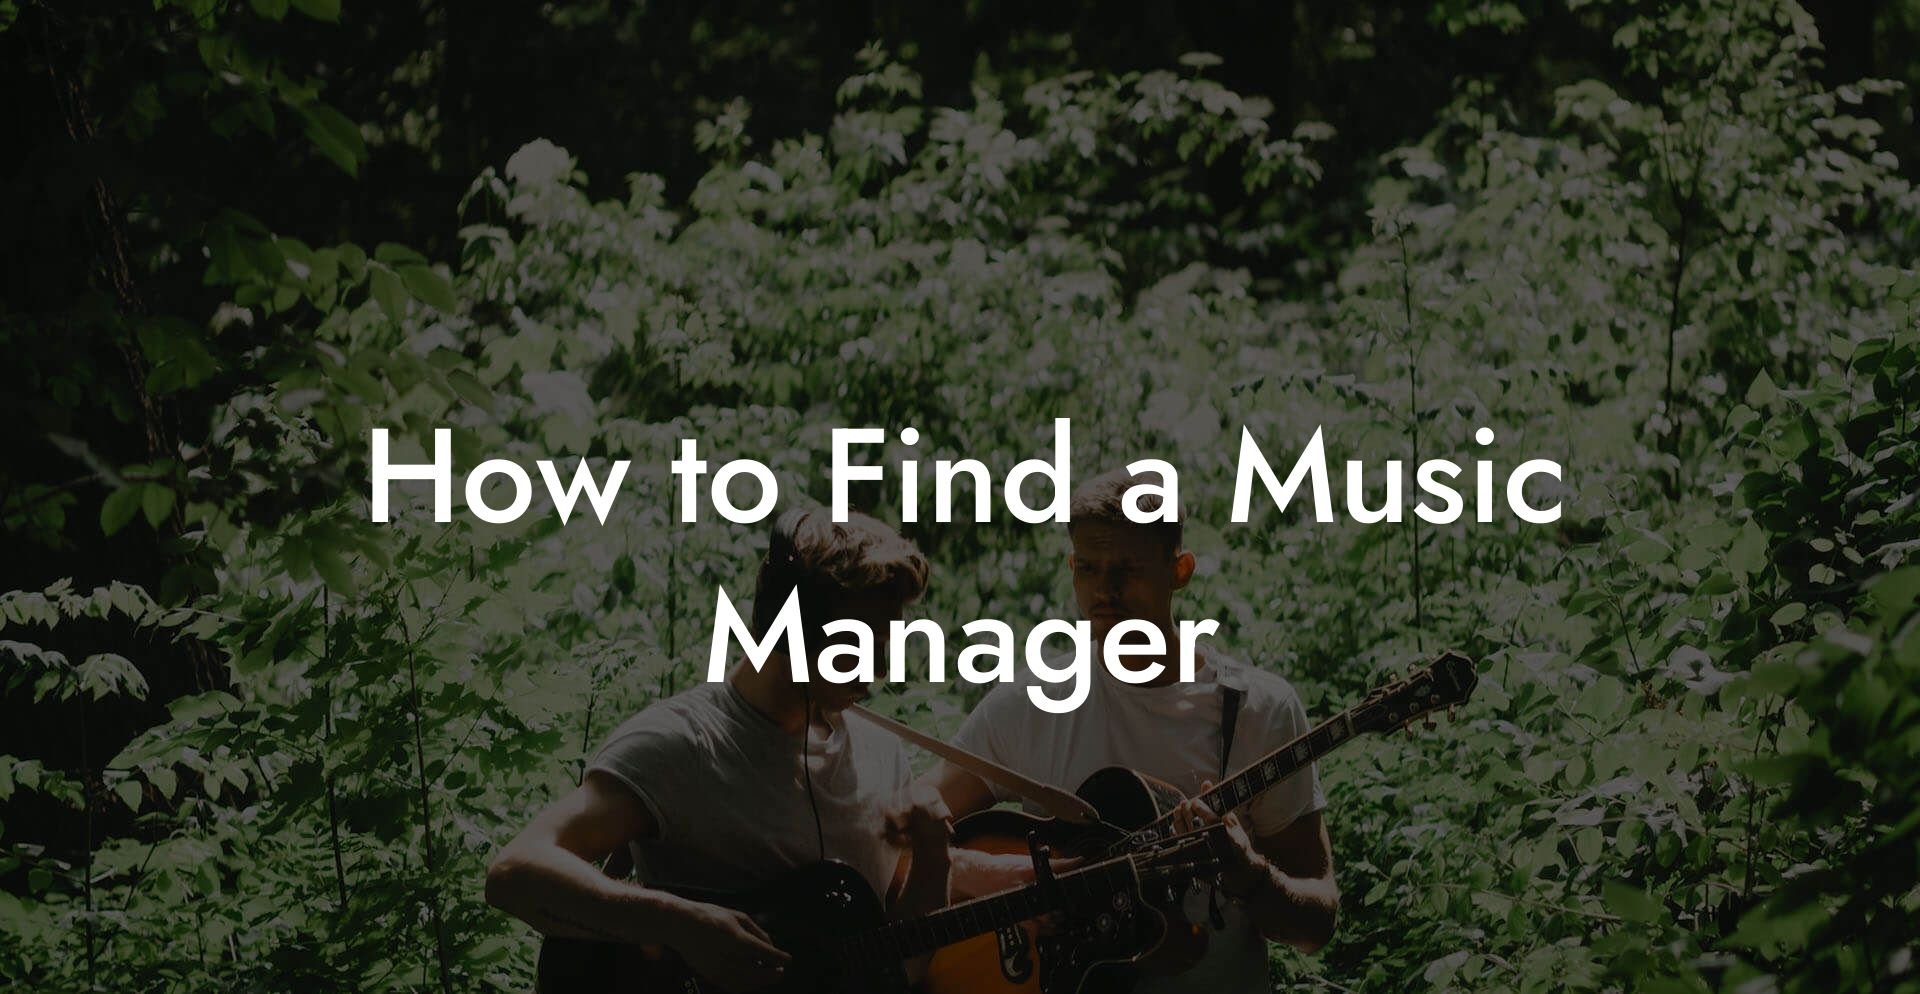 How to Find a Music Manager